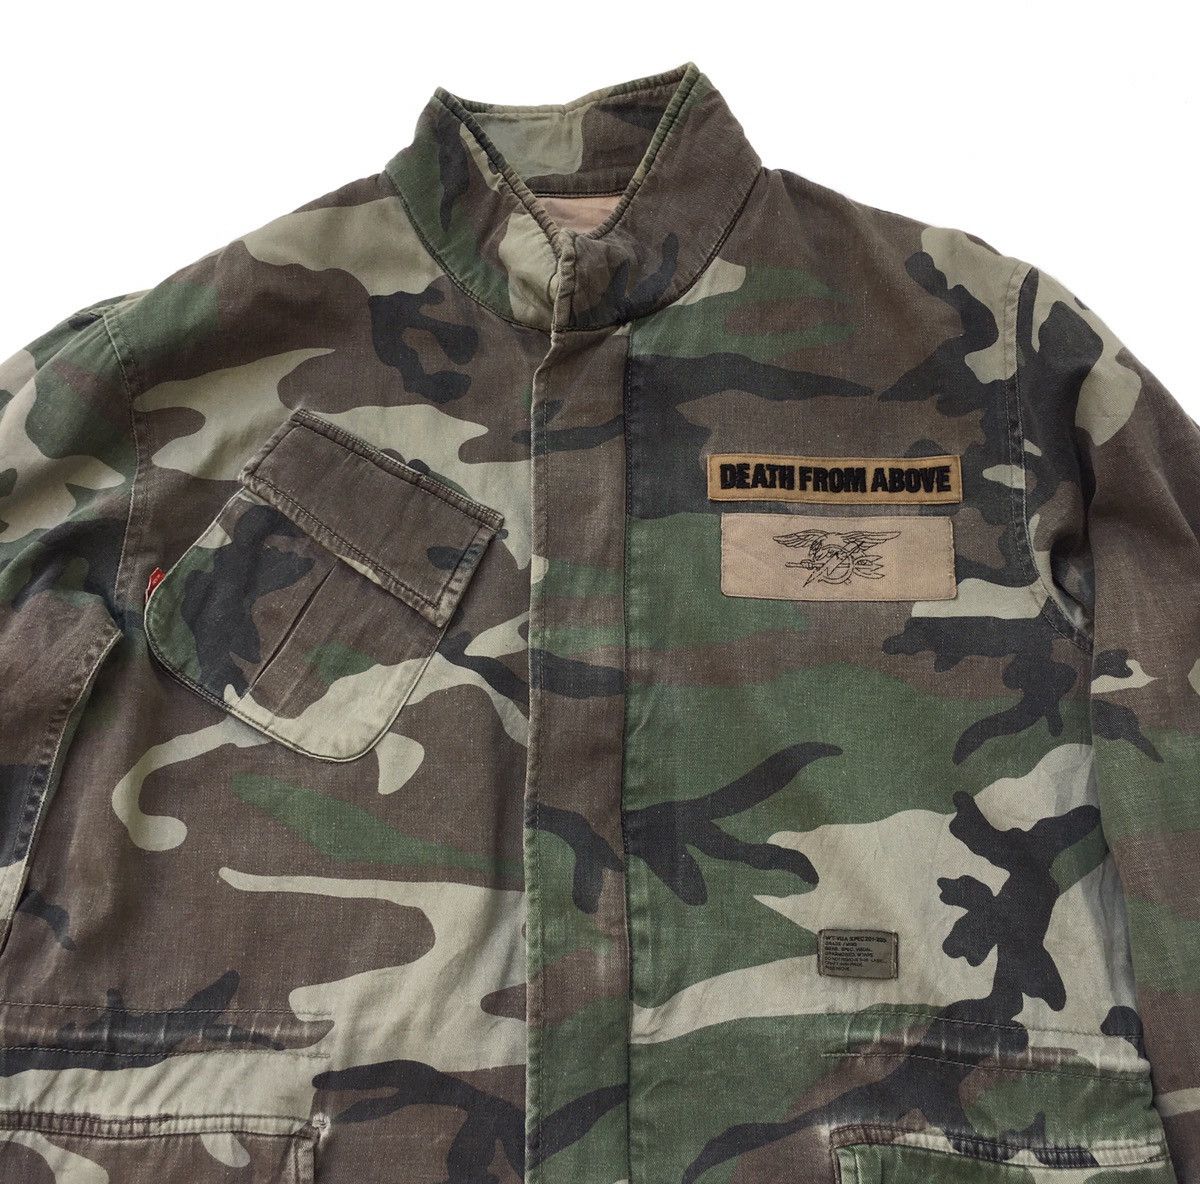 🔥WTAPS M65 Death From Above Ripstop JACKET - 11